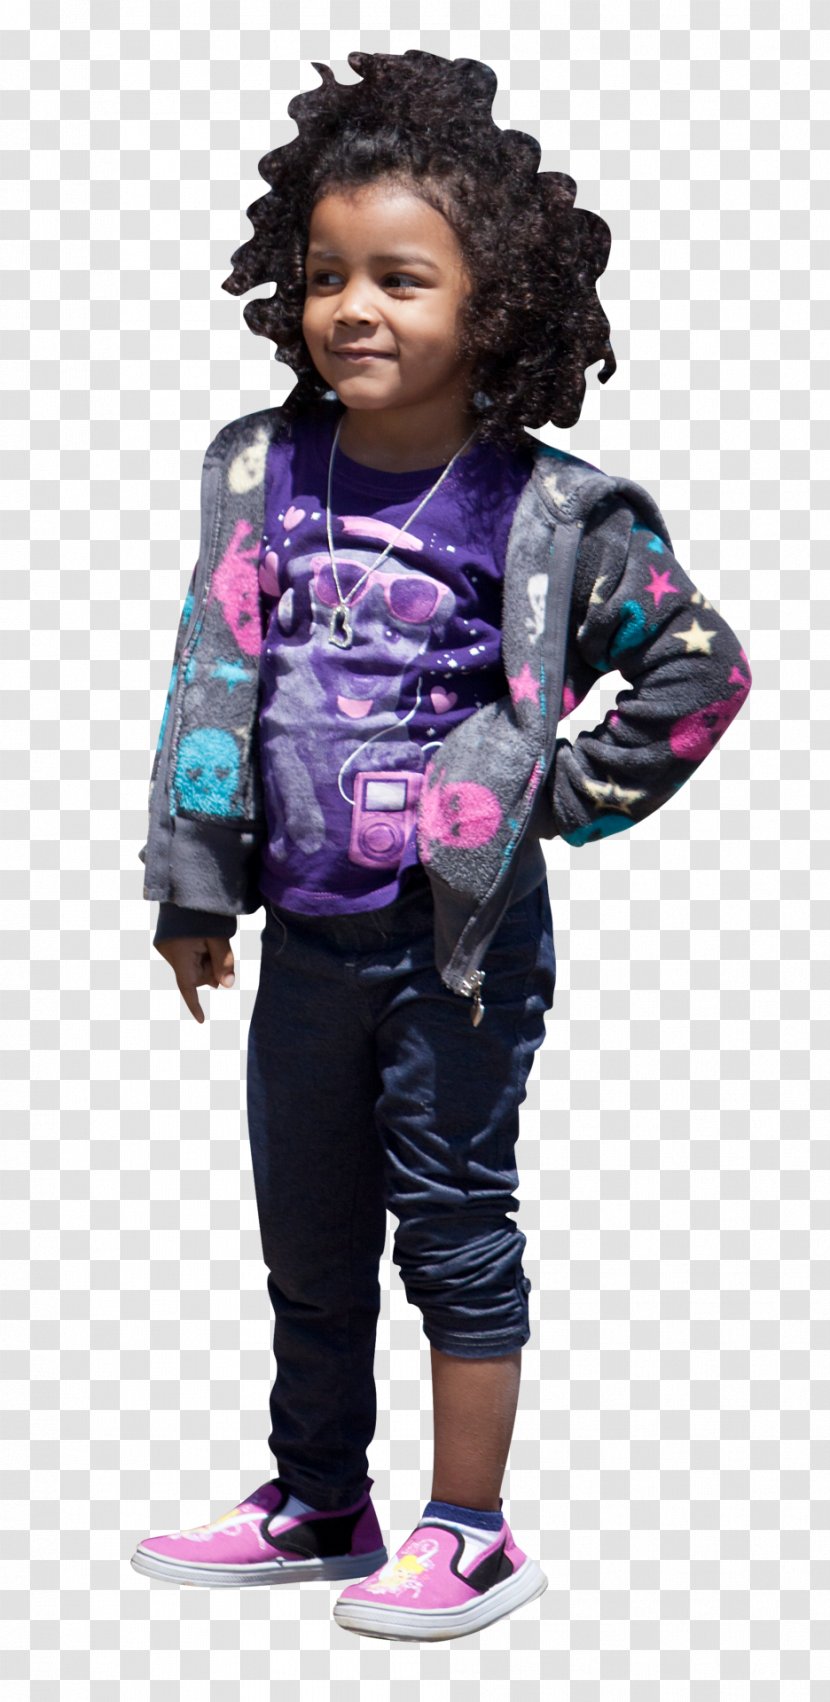 Toddler Child Entourage Outerwear Creative Commons License - Play - Kids Sitting Transparent PNG